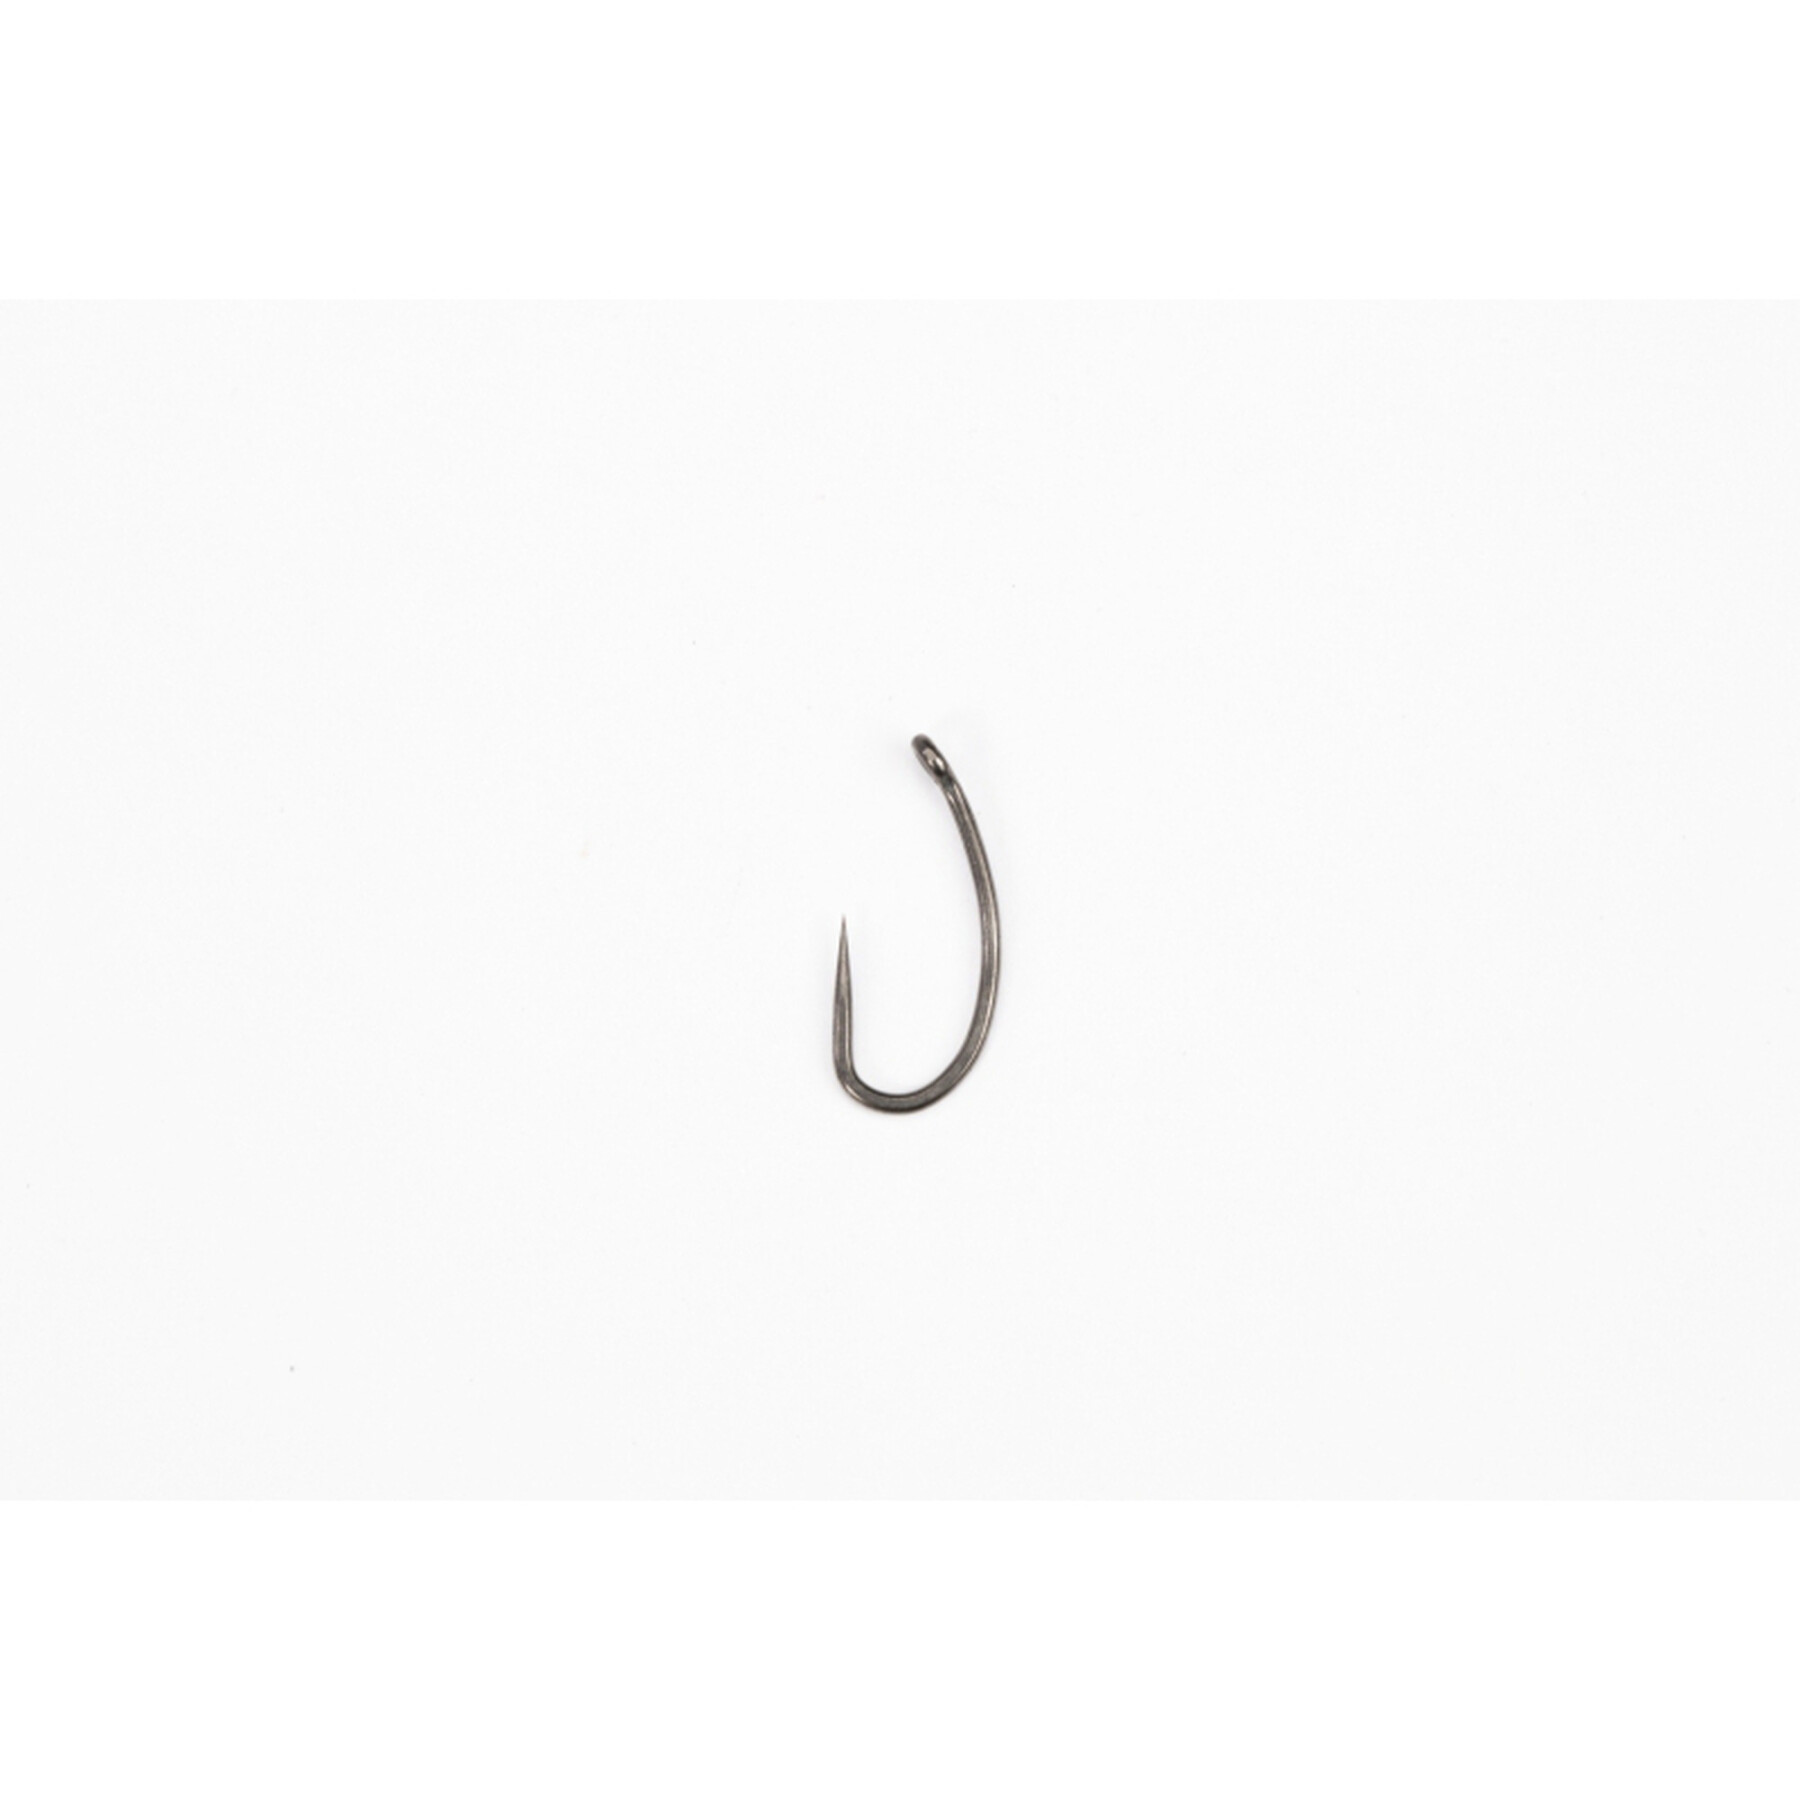 Hook Pinpoint Fang X size 4 Micro Barbed